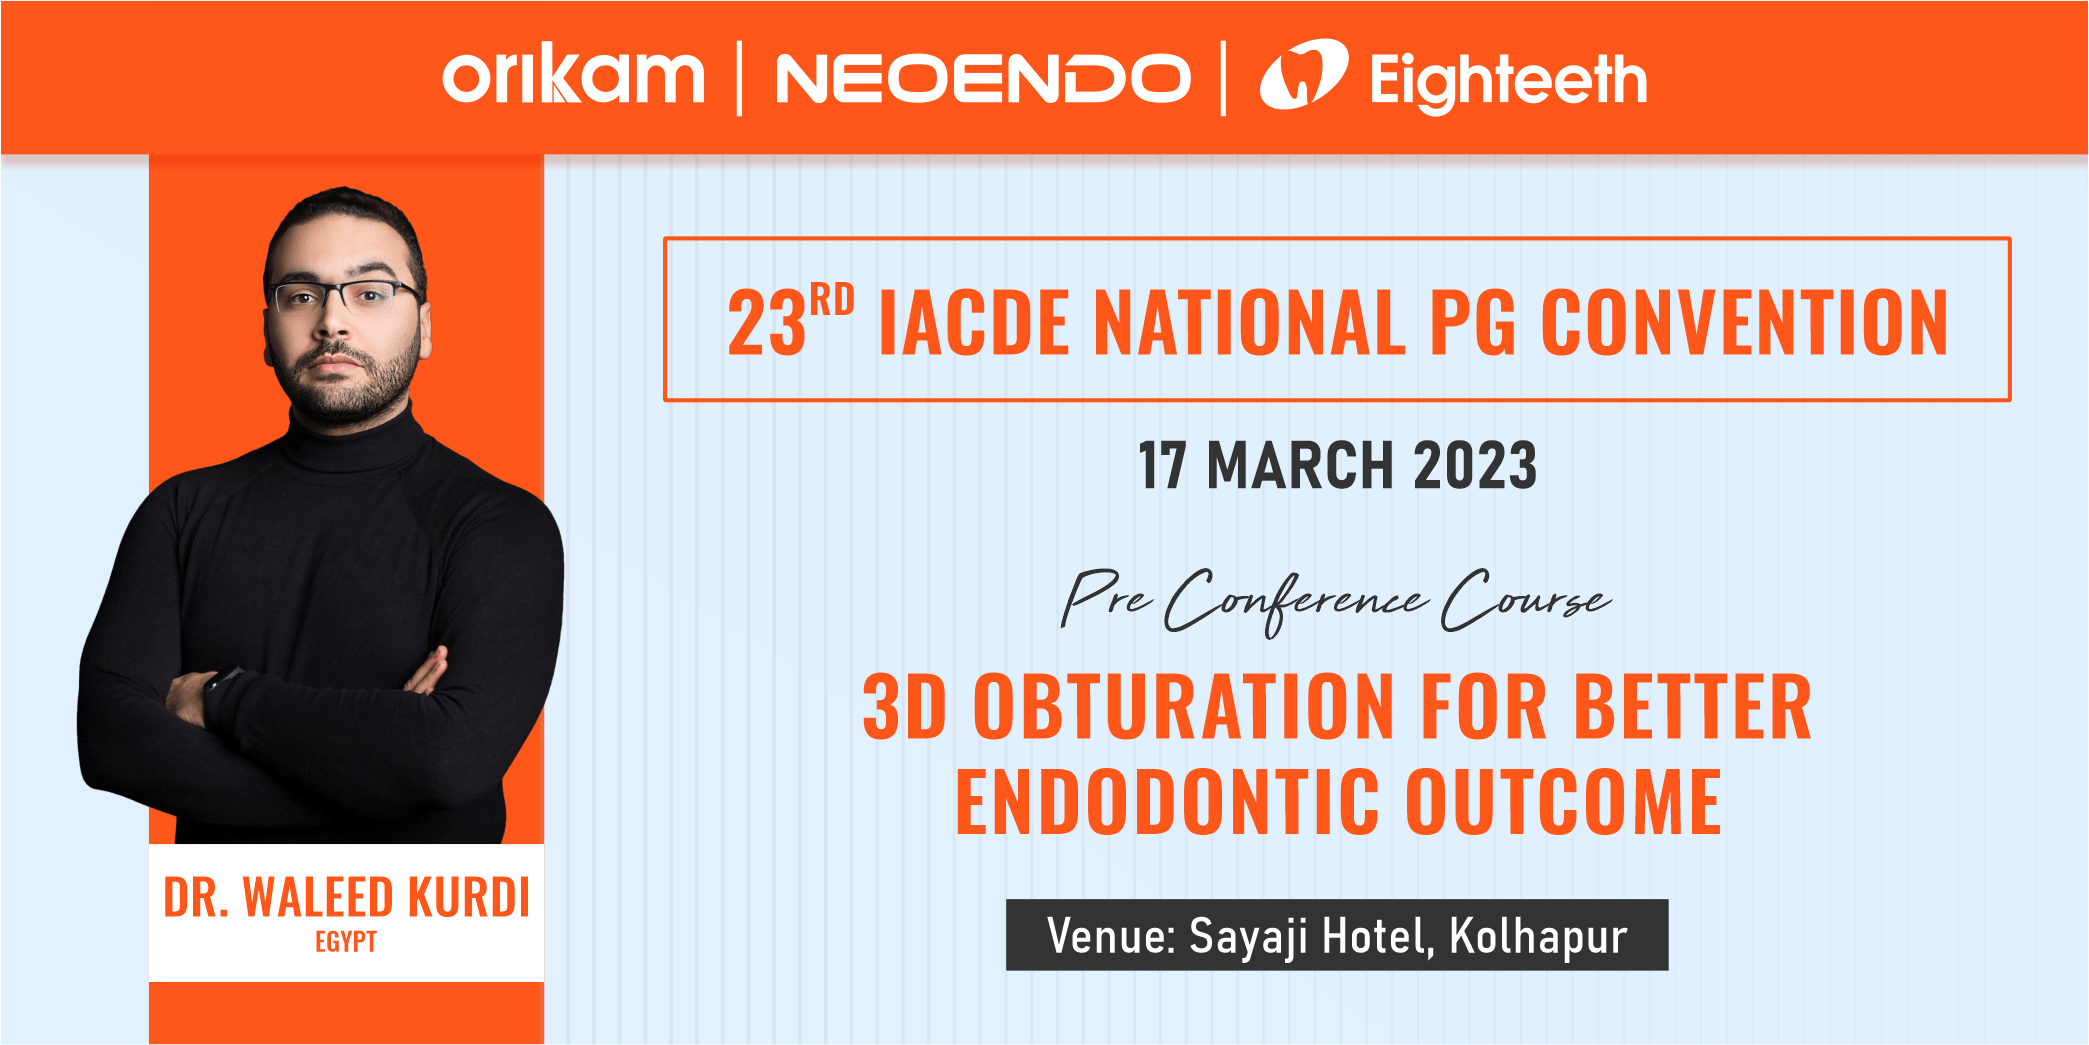 3rd Obturation for Better Endodontic Outcome